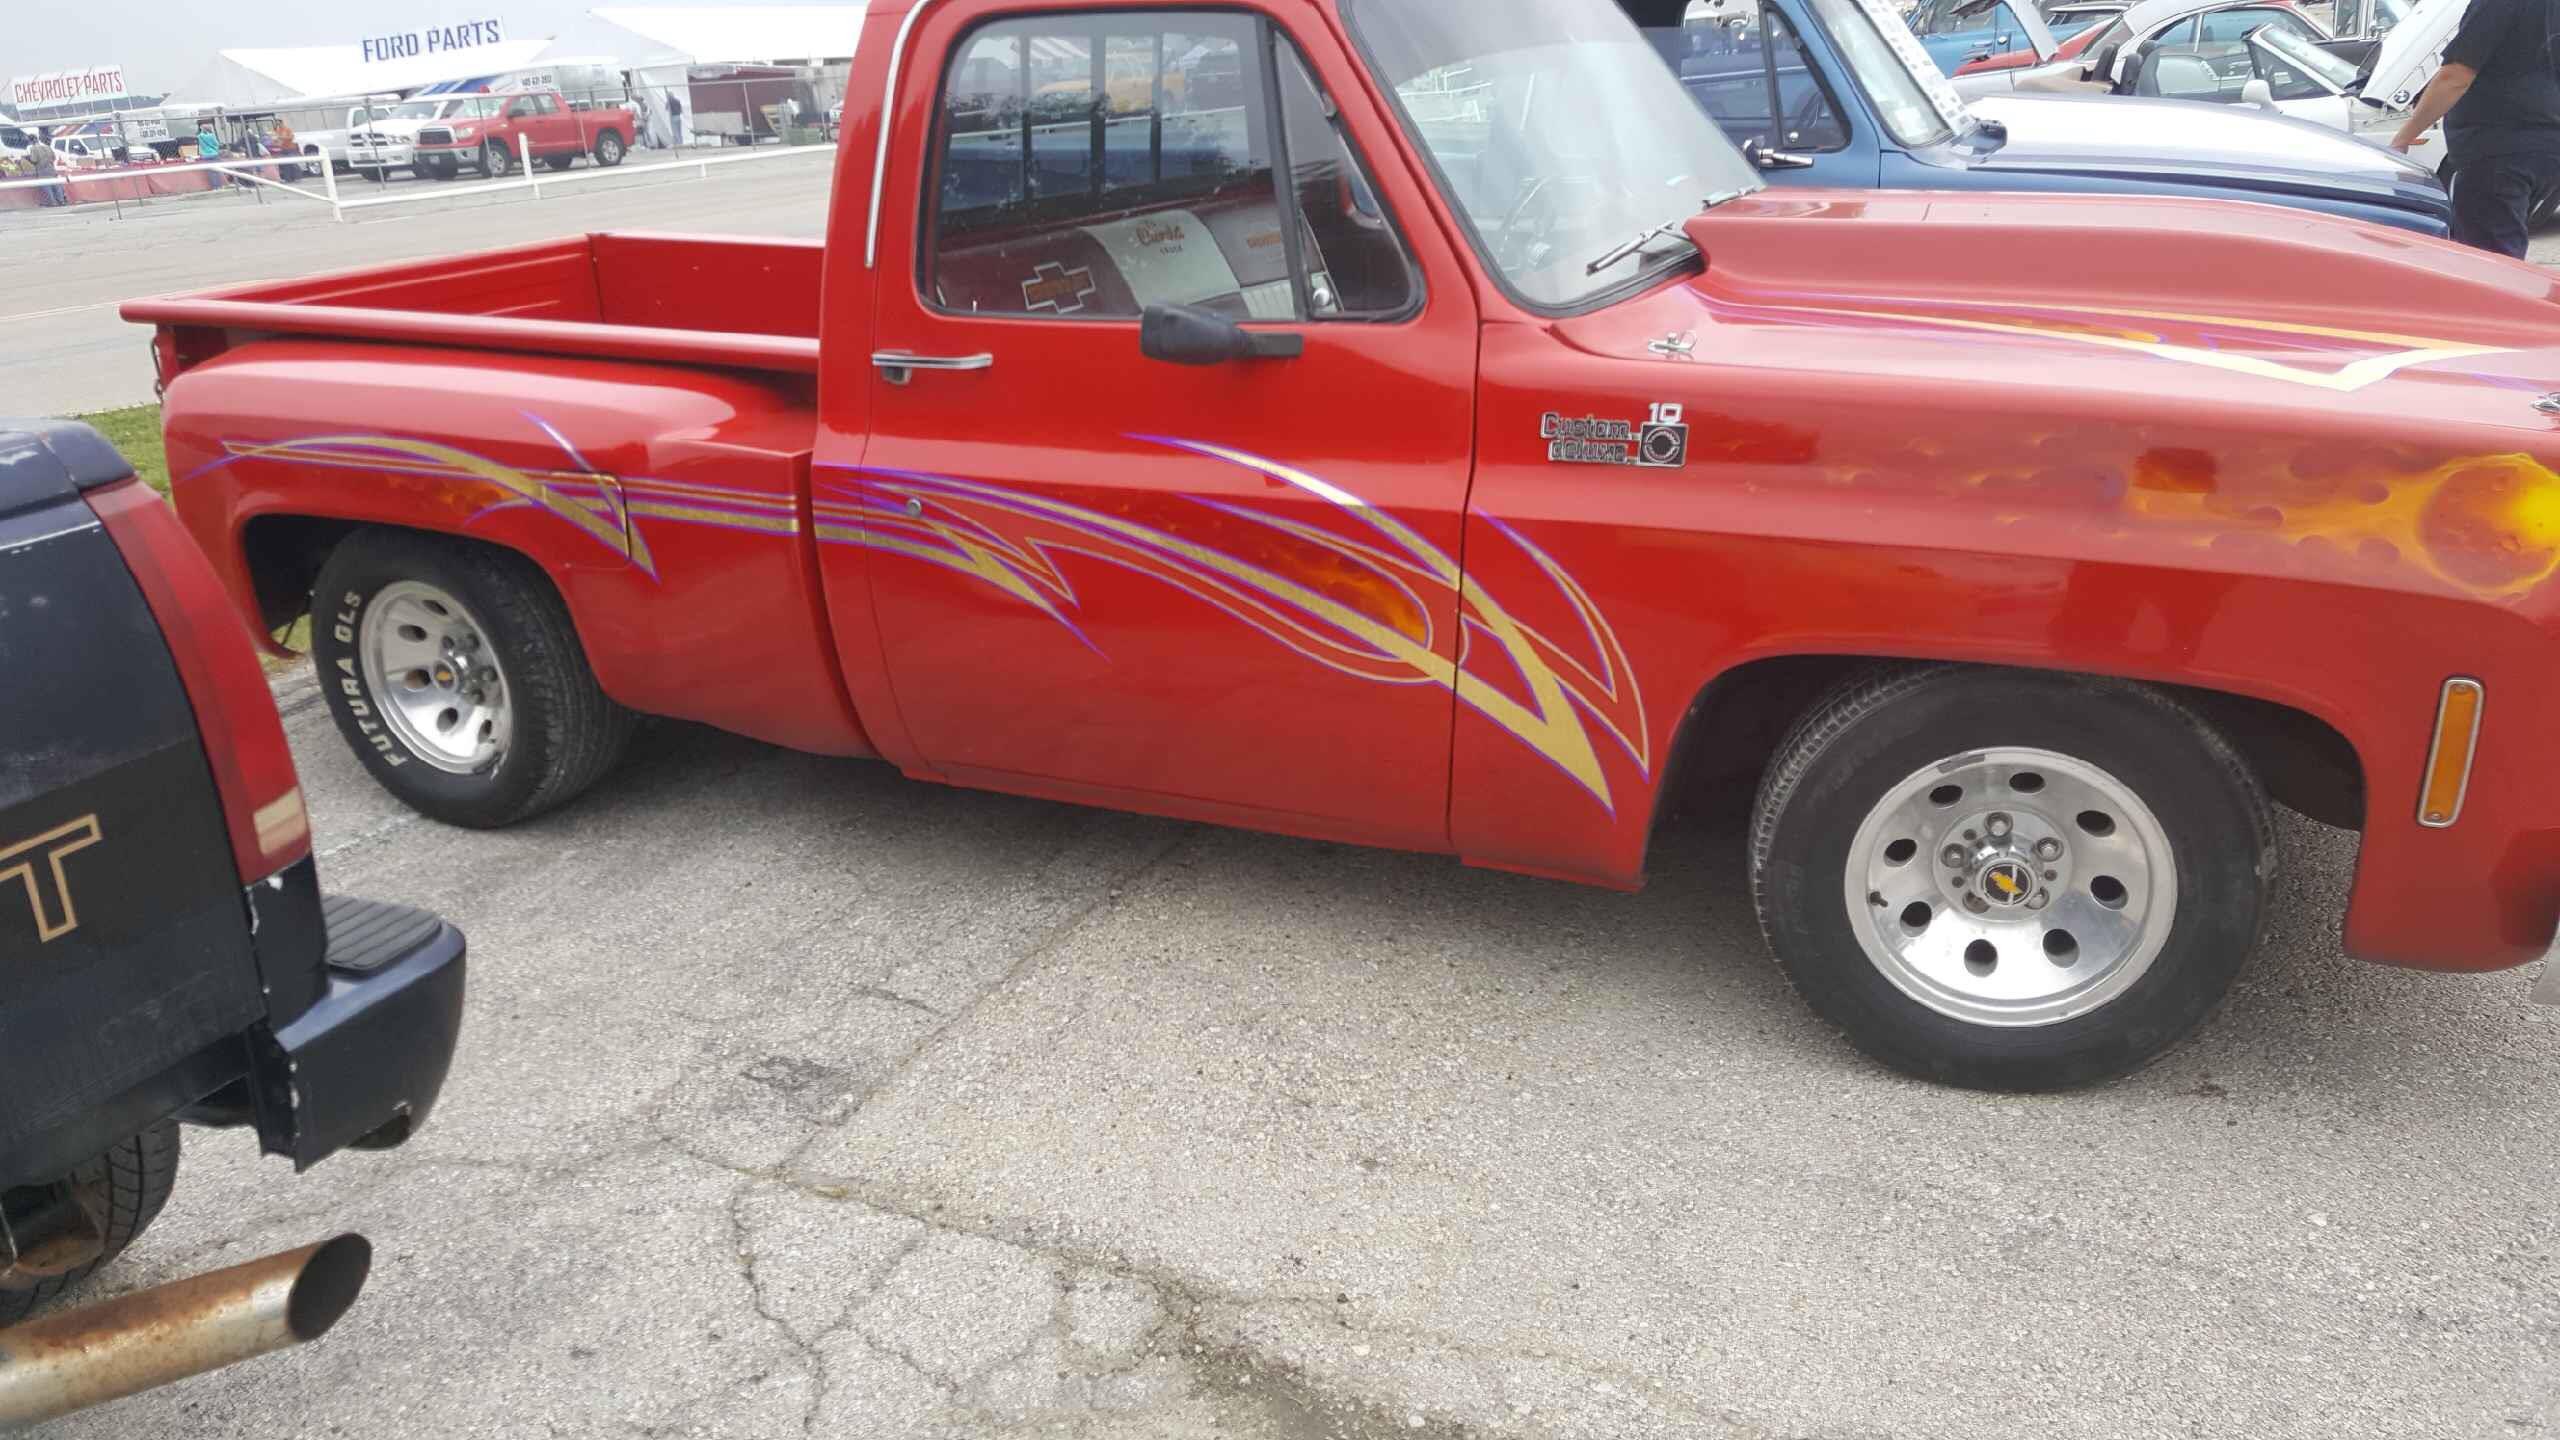 1979 Chevrolet C-10 Pickup Lowed to $19,000 from $36k